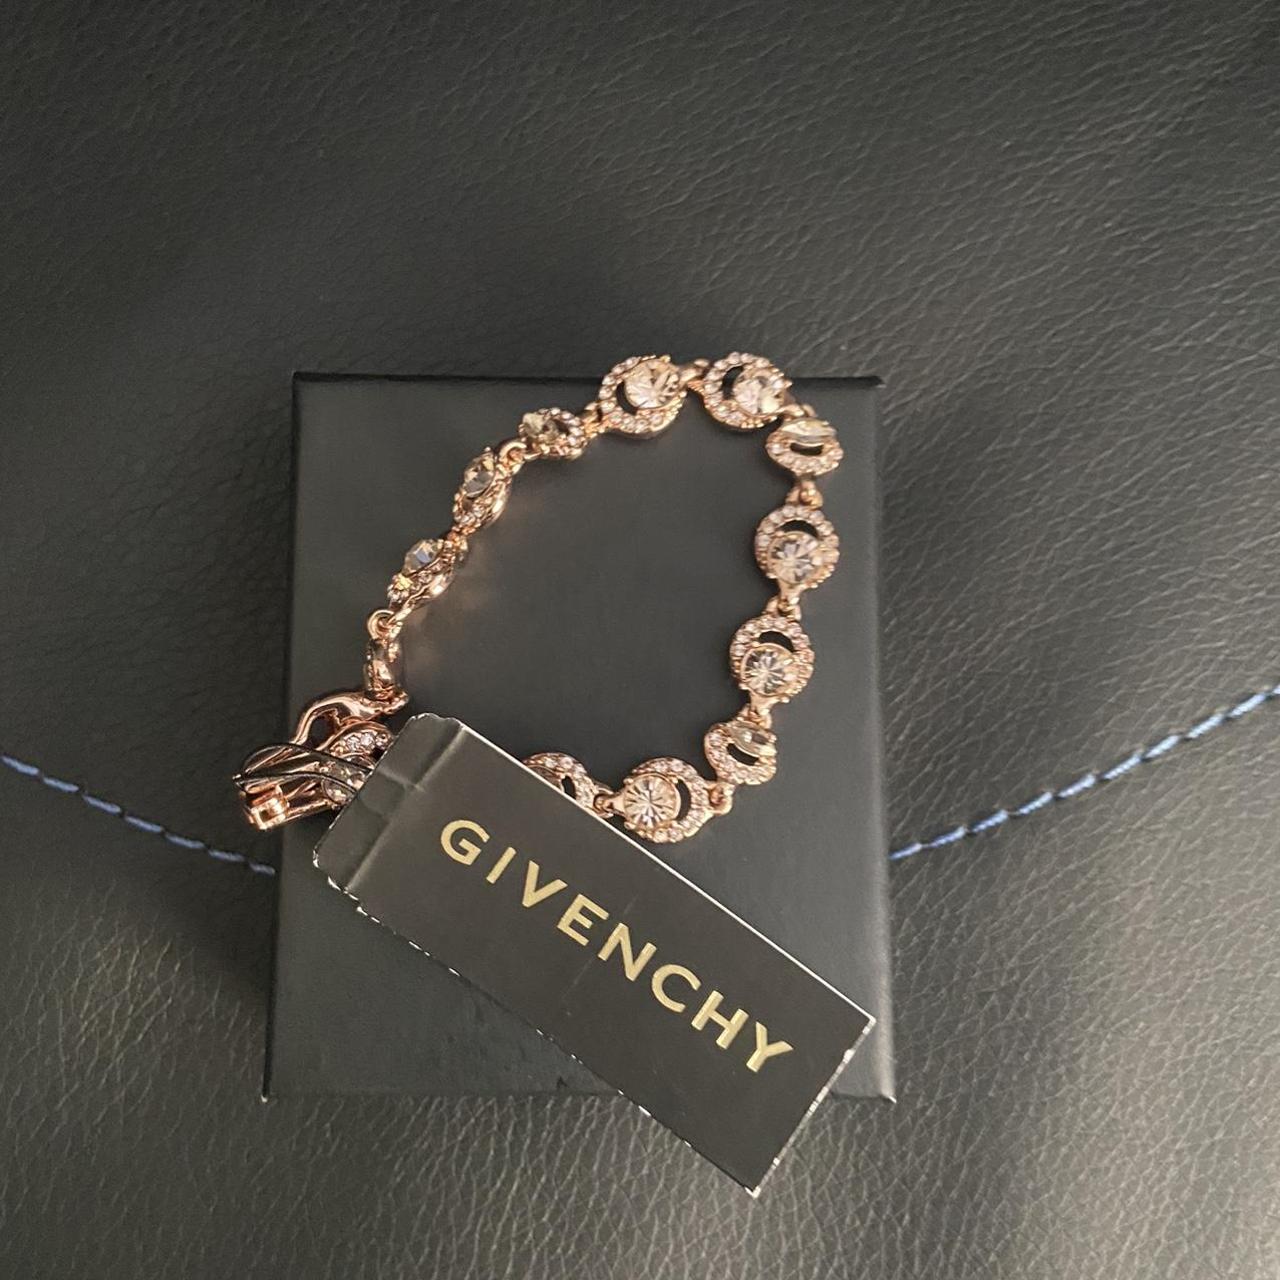 Givenchy Men's Gold Jewellery | Depop